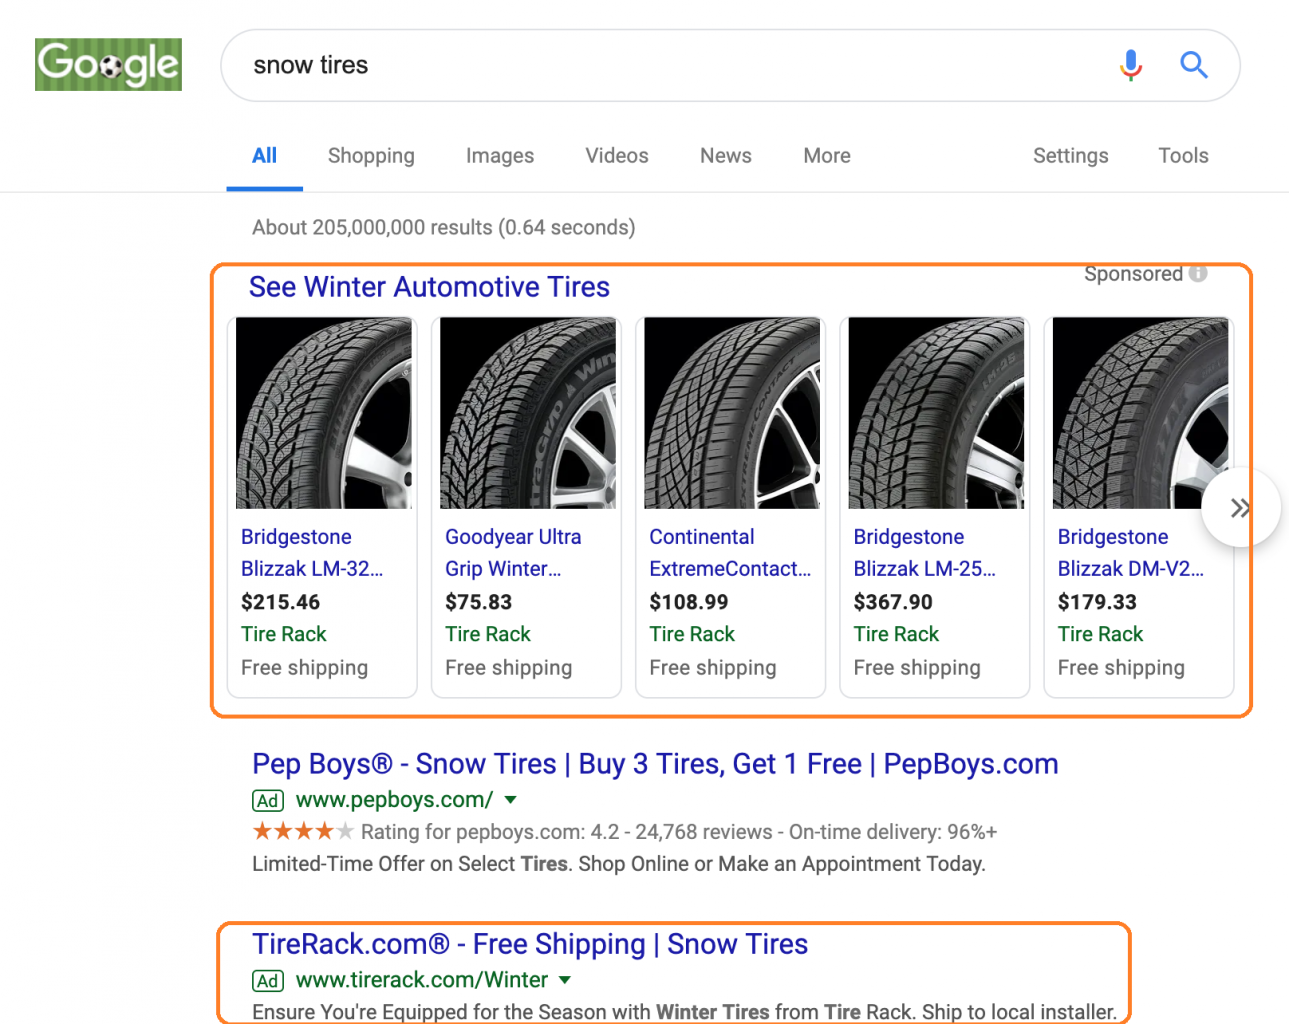 Holistic Search - Enterprise SEO strategy - Snow Tires example